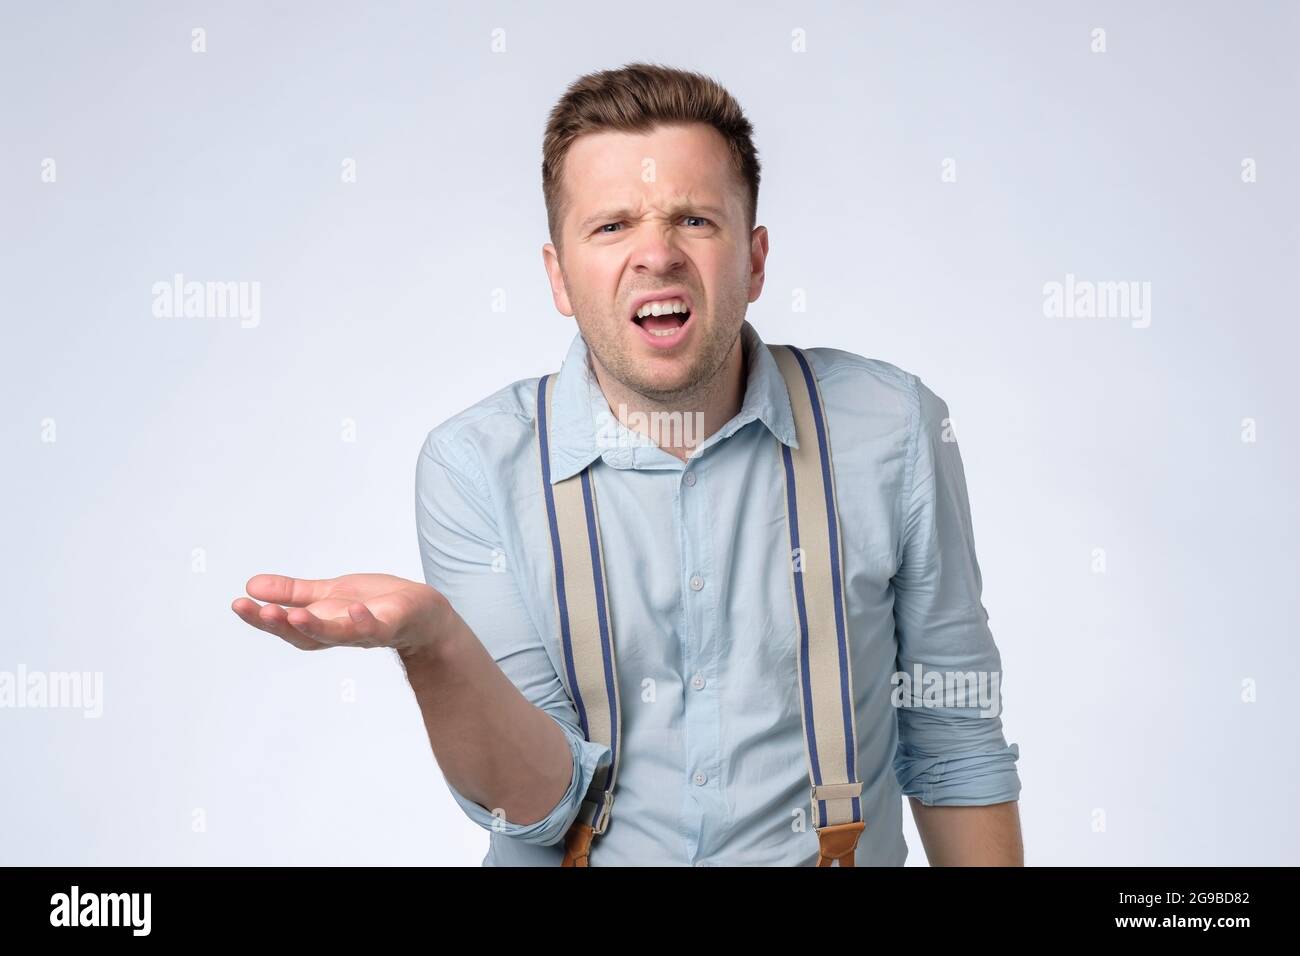 man with angry facial expression asking so what do you want from me. Stock Photo